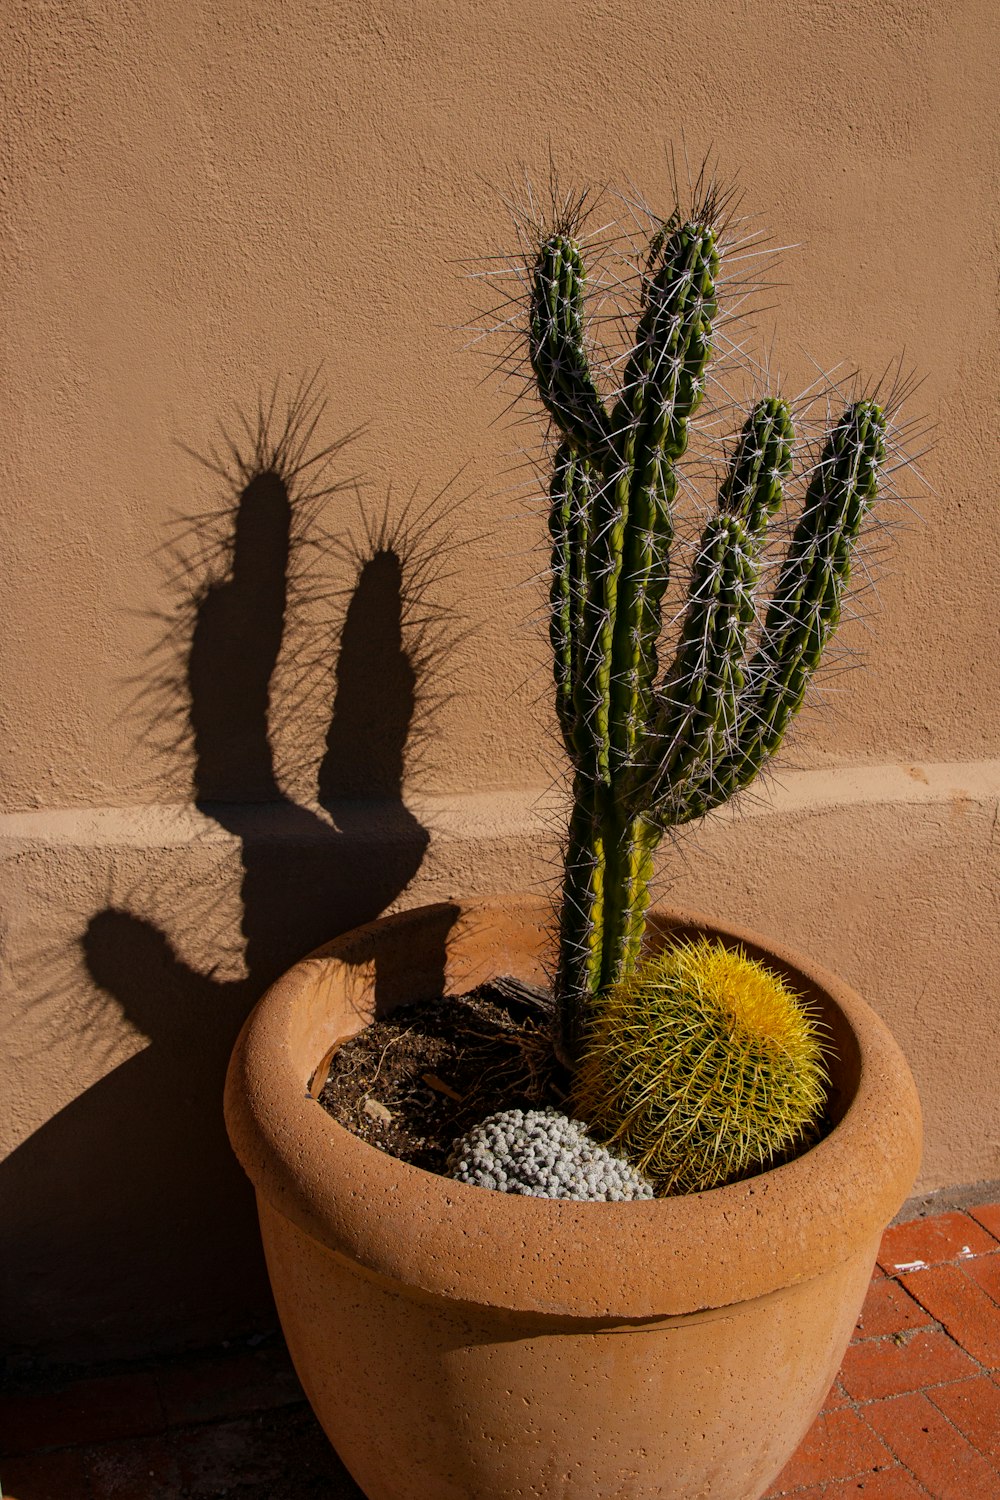 a cactus in a pot on the ground